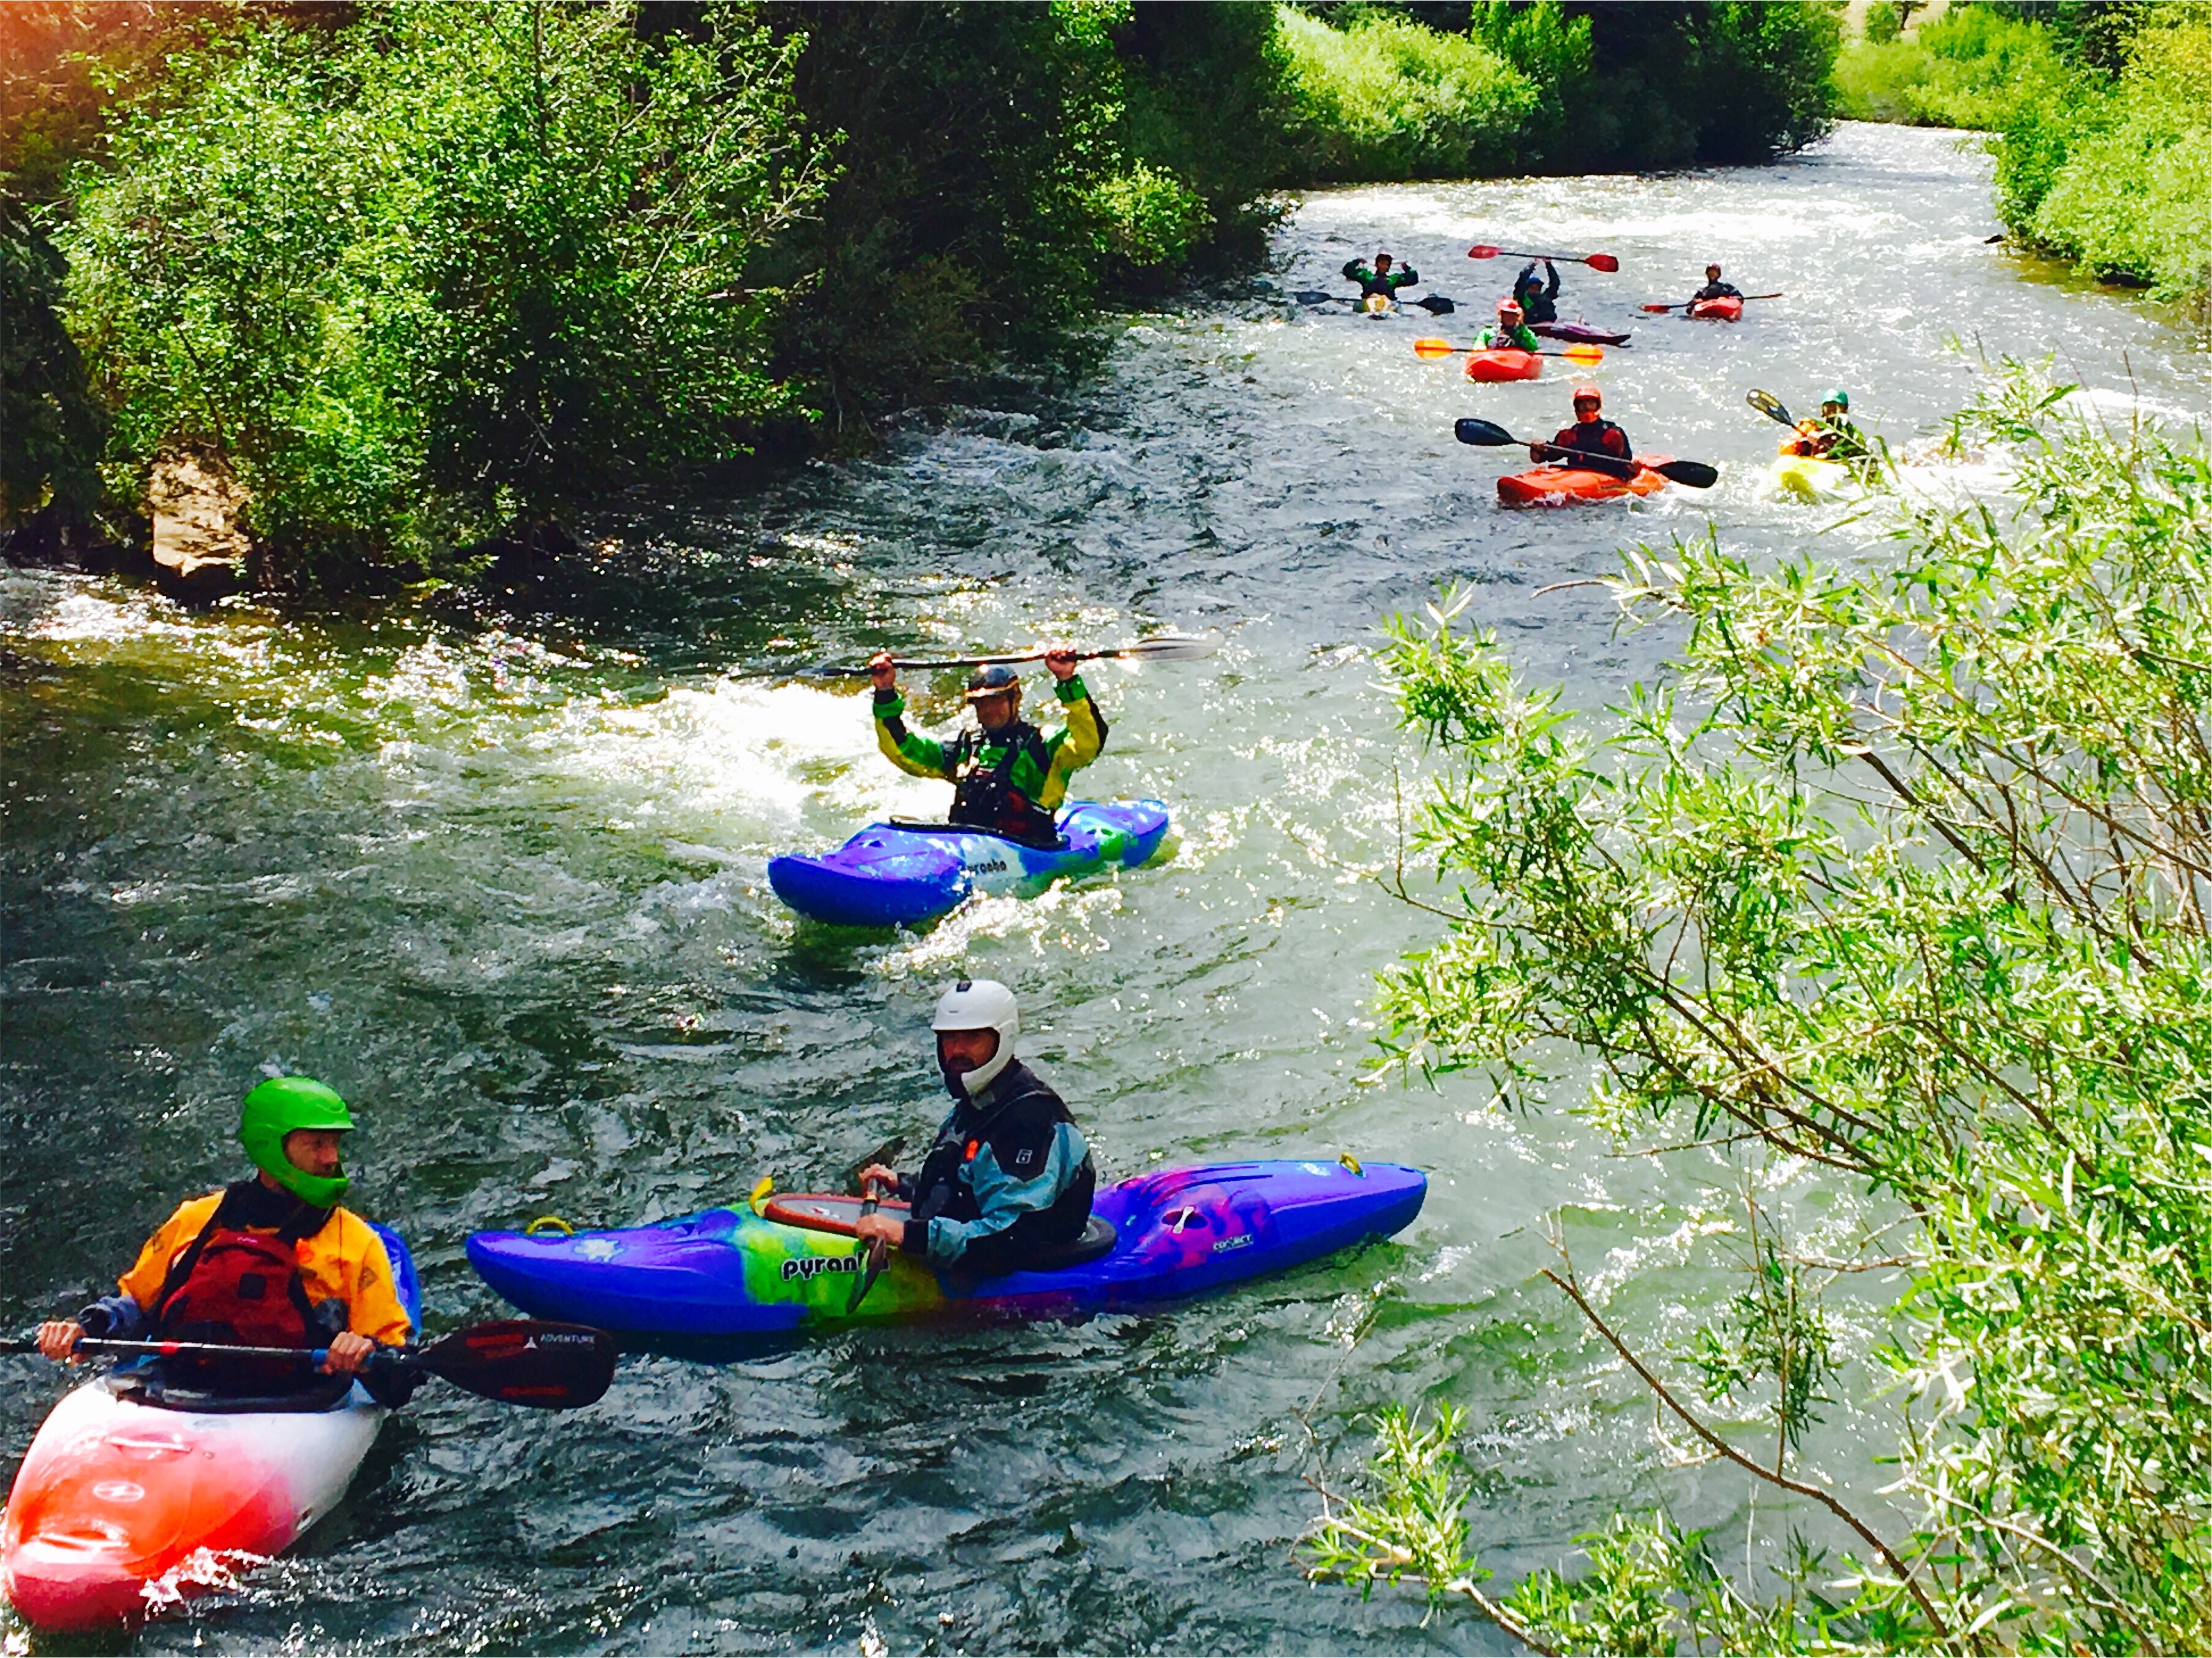 Kayakers on the South Platte River during BaileyFest 2016.